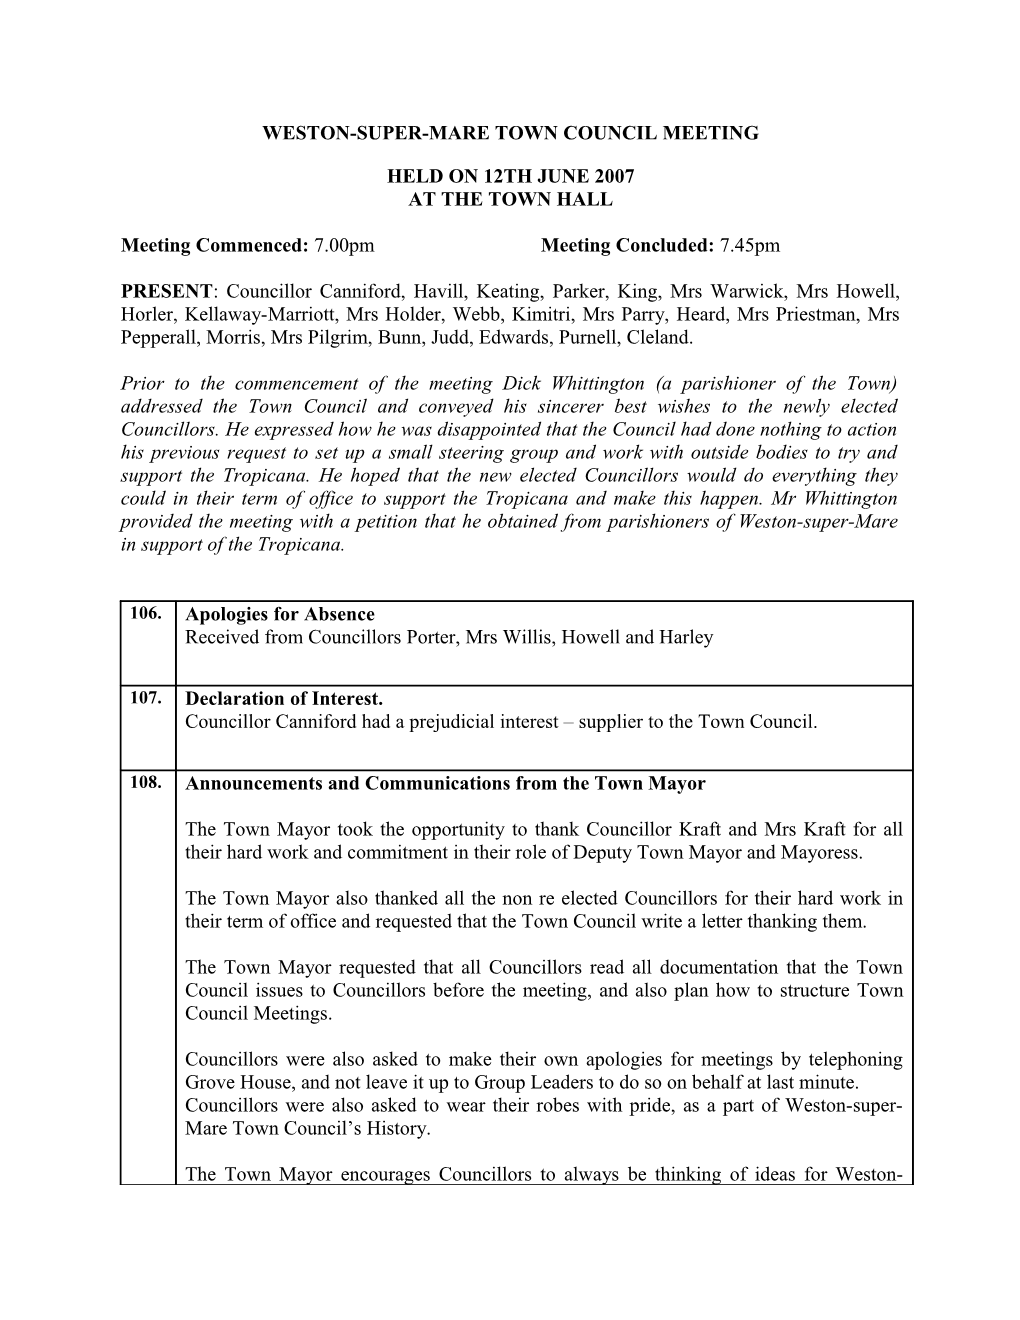 Weston-Super-Mare Town Council Meeting